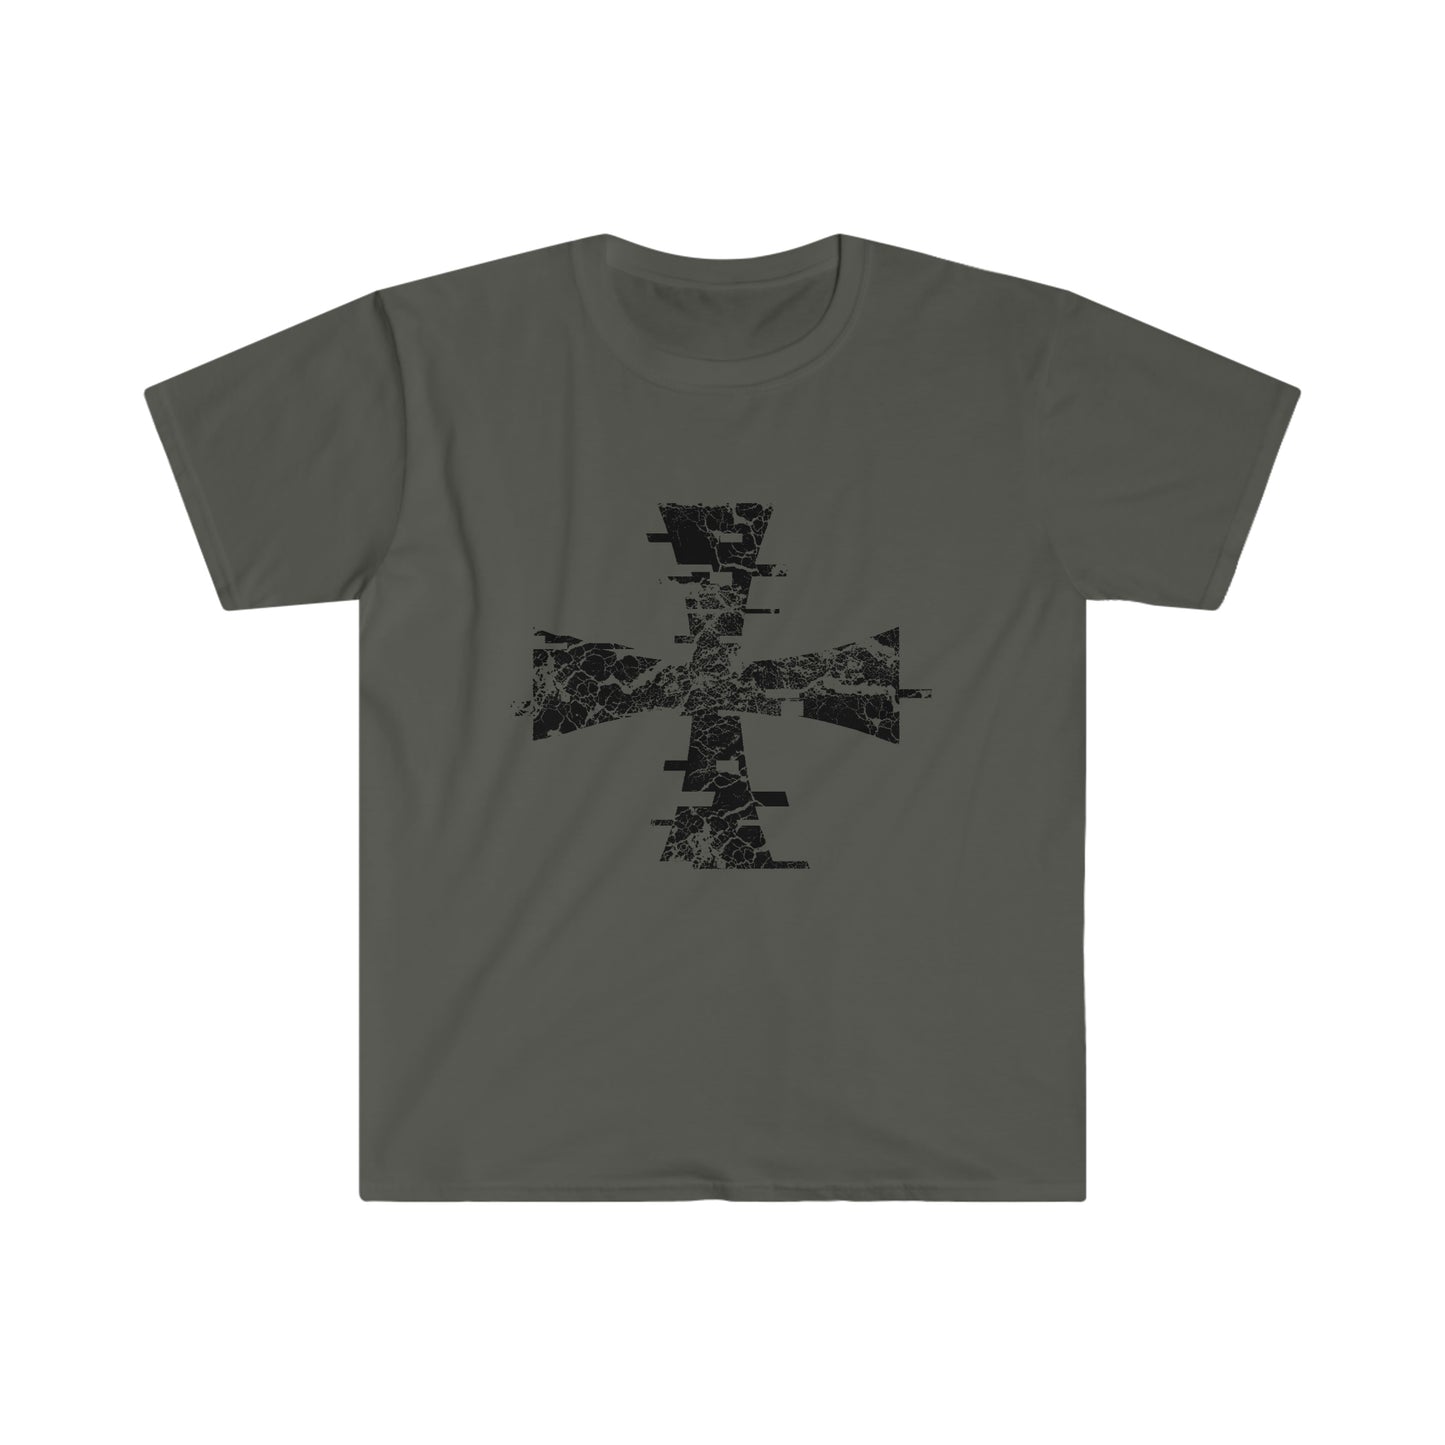 Charcoal colored Gildan T-Shirt with Distressed Digital Crusader Logo on it 